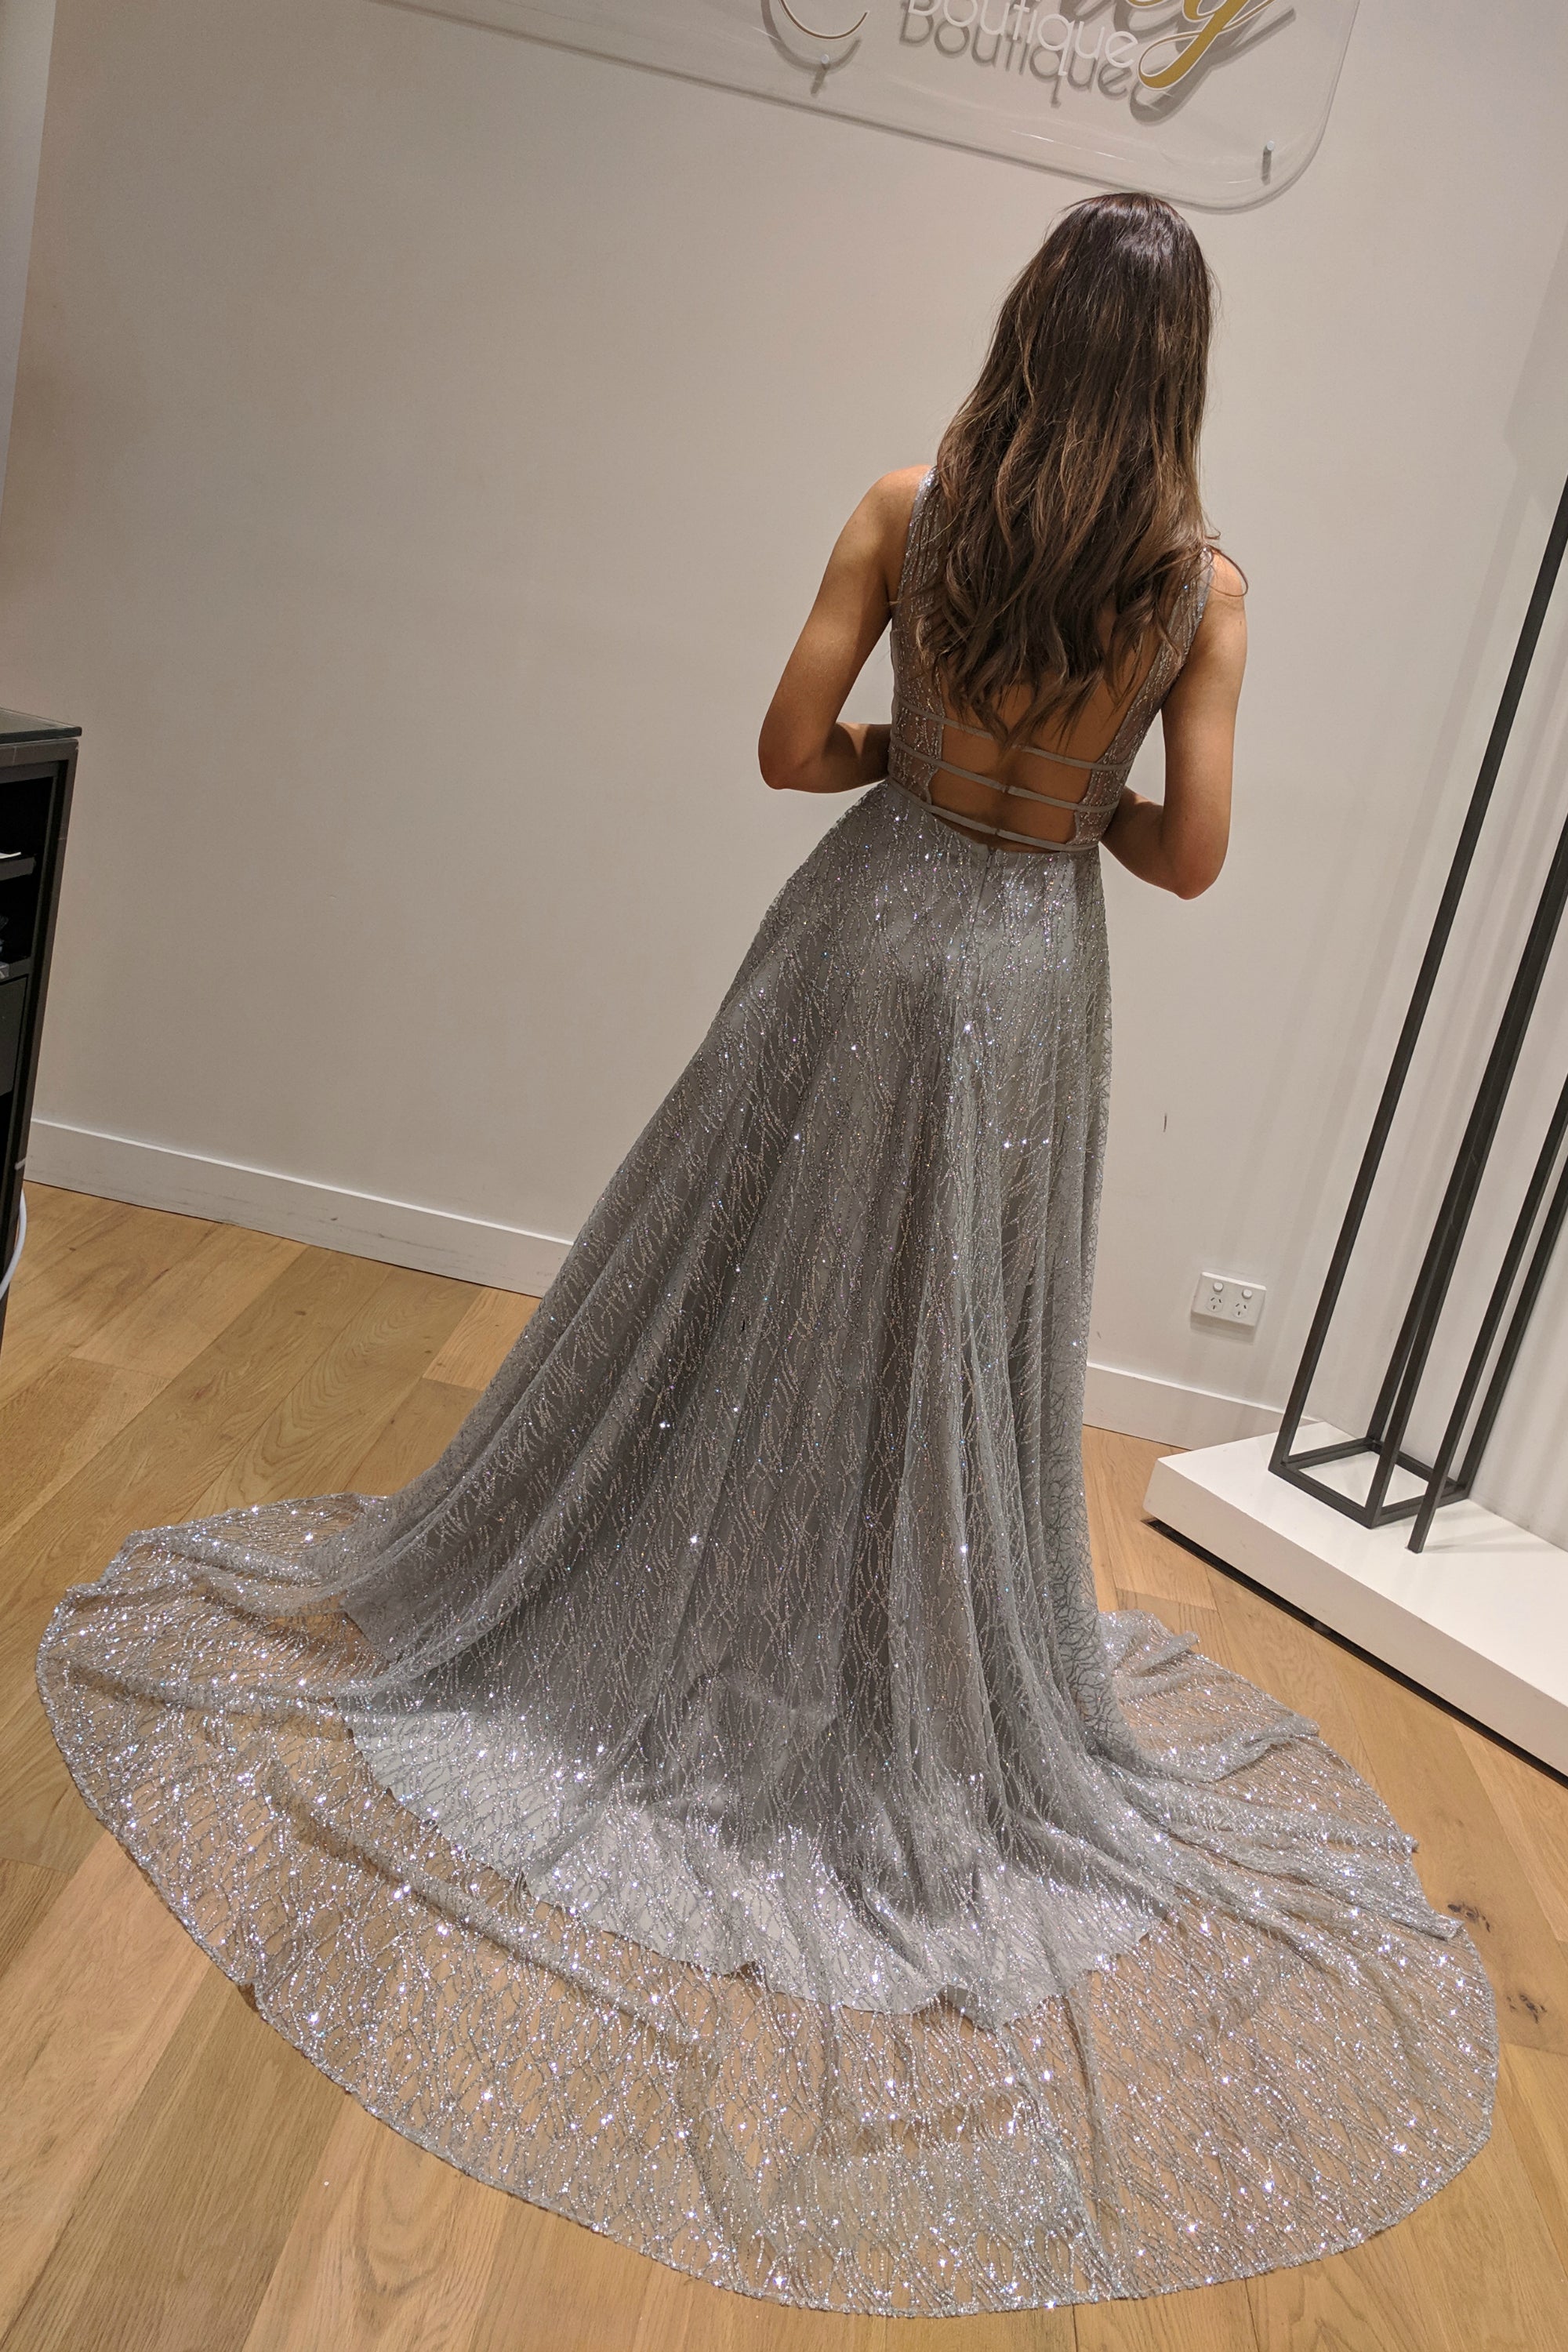 Honey Couture DAZZLING Silver Sequin Princess Formal Gown Dress Honey Couture Custom$ AfterPay Humm ZipPay LayBuy Sezzle